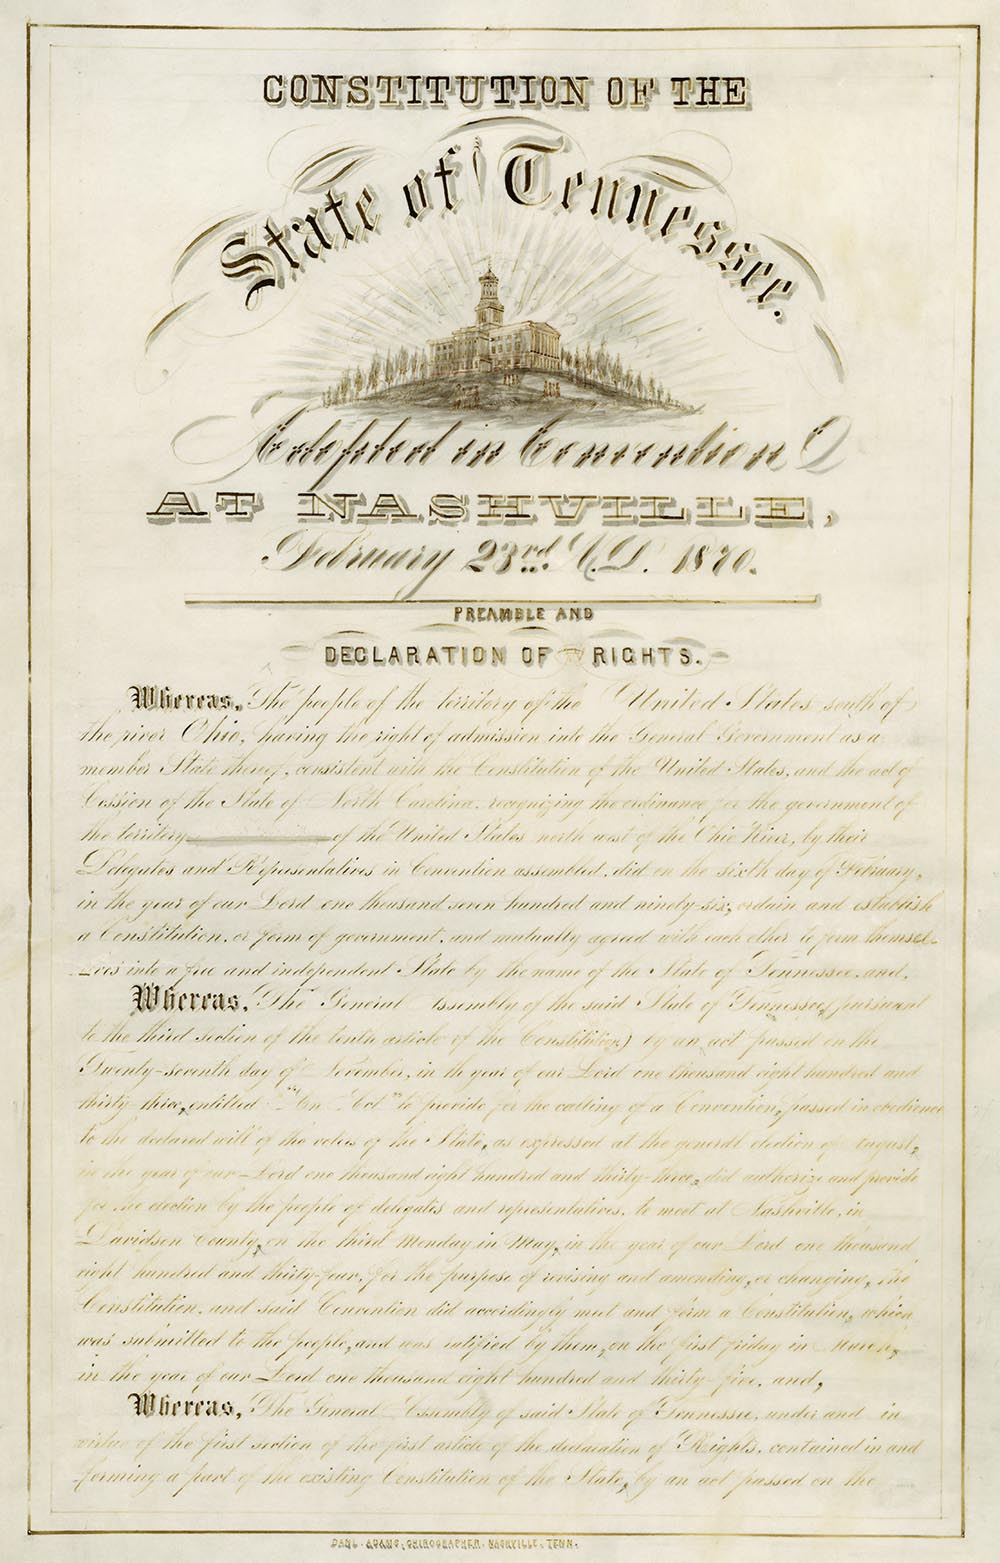 Page from Tennessee's third Constitution, adopted in 1870.